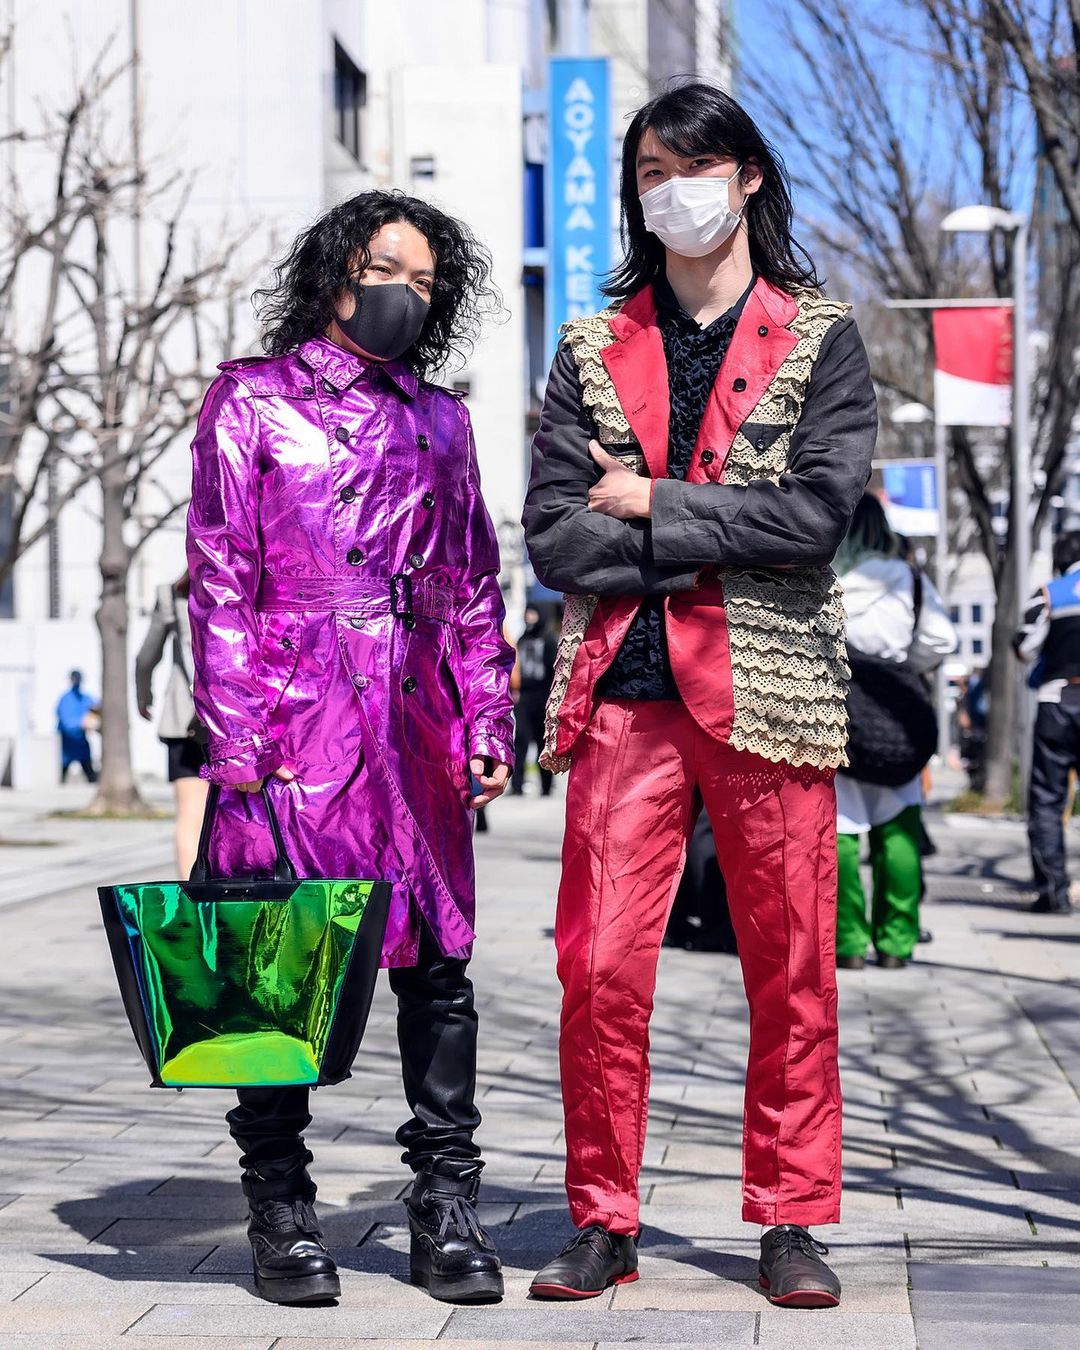 Tokyo Fashion Tokyo Fashion Week started! Our street snaps from day